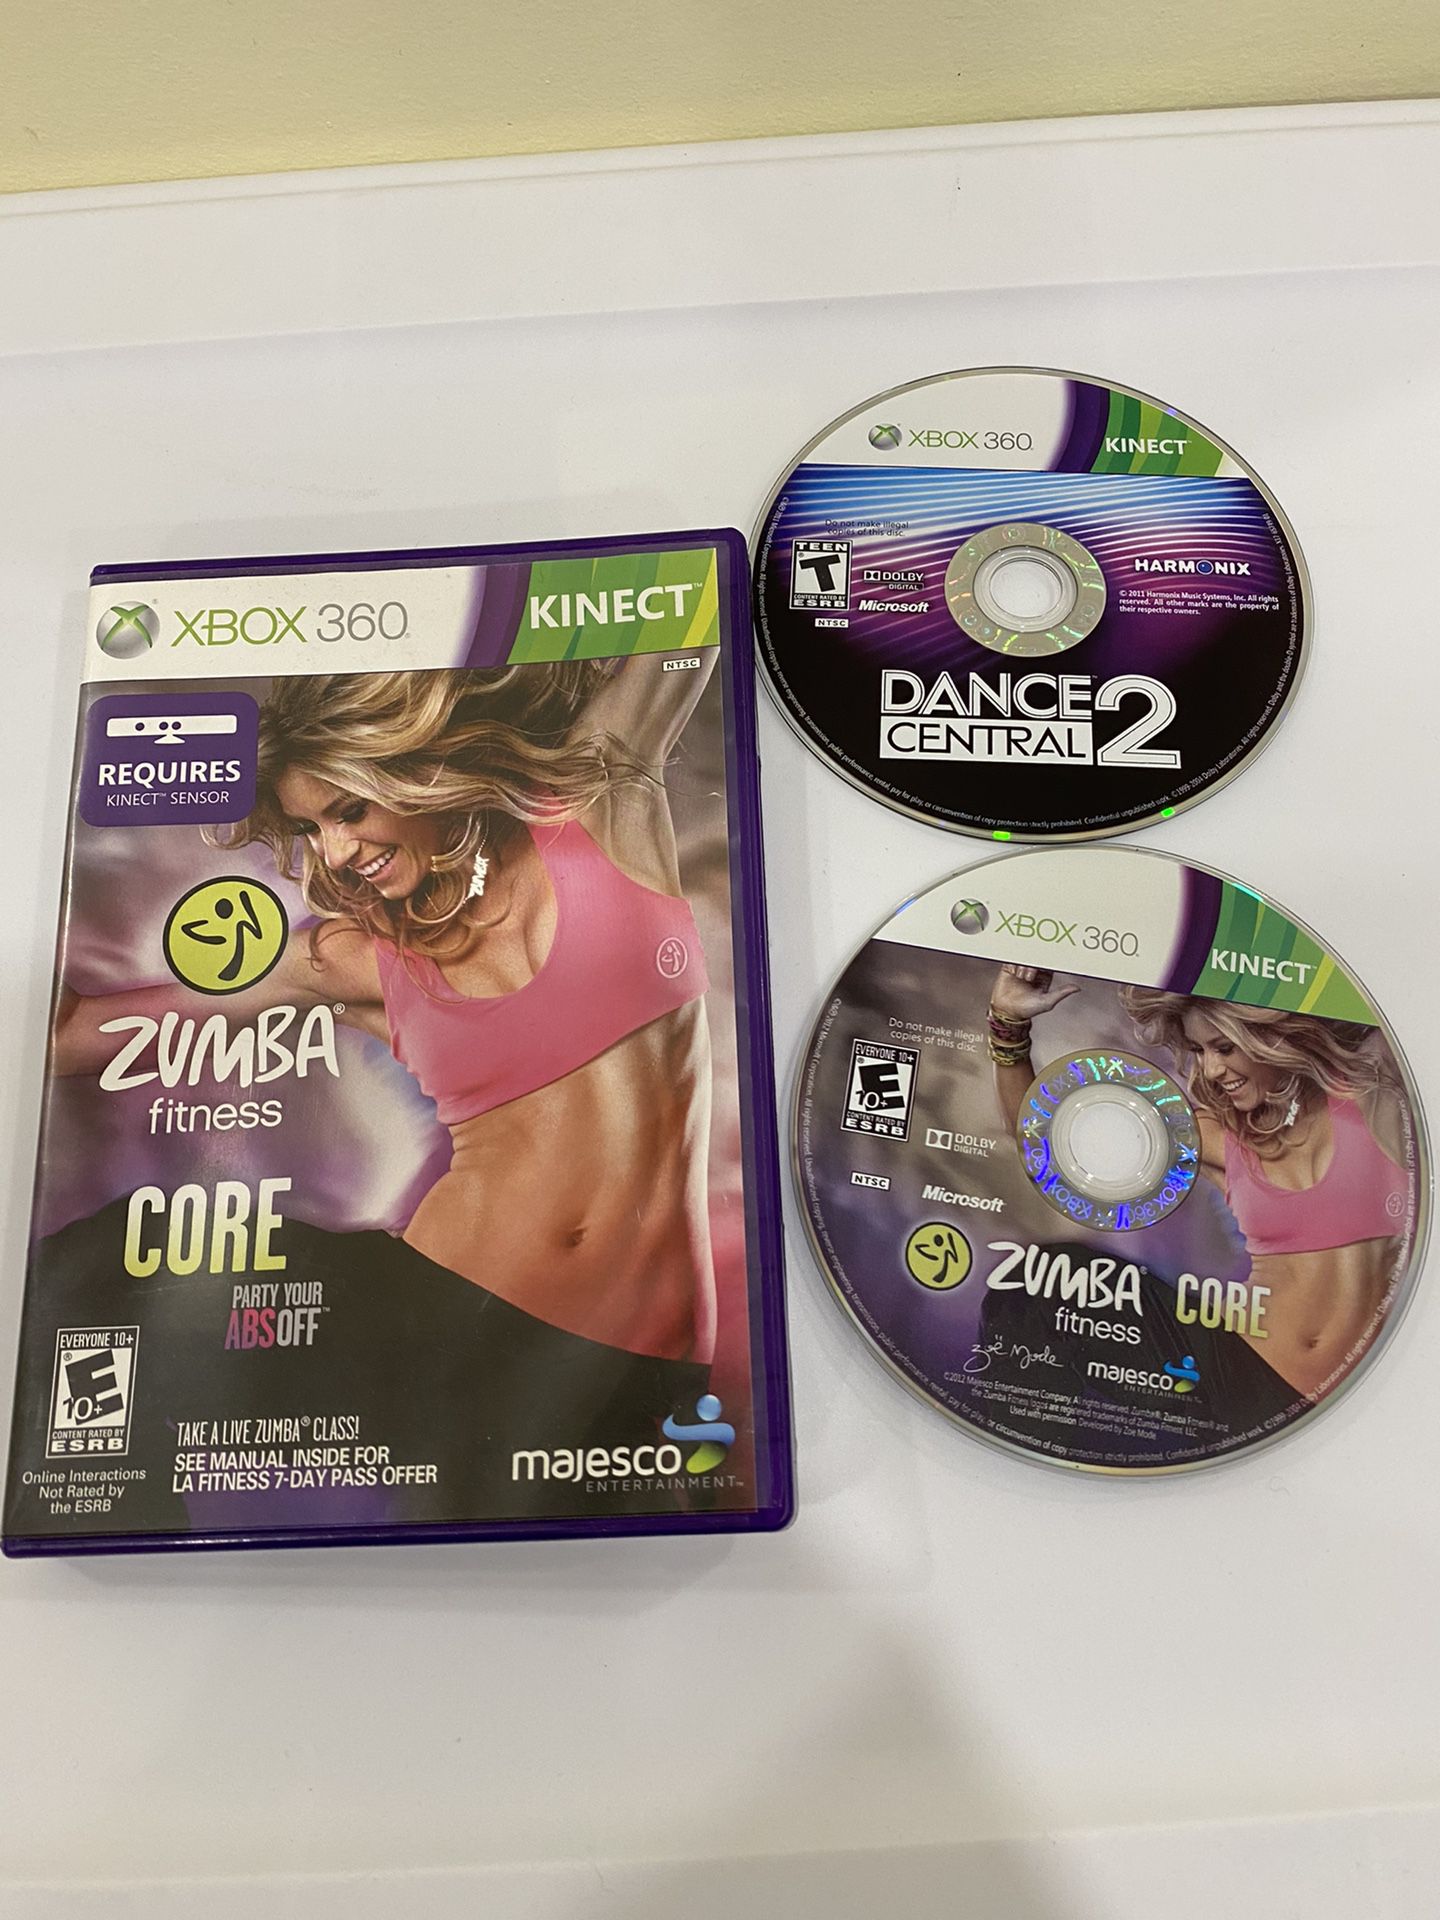 Xbox 360 Kinect Zumba and dance central games